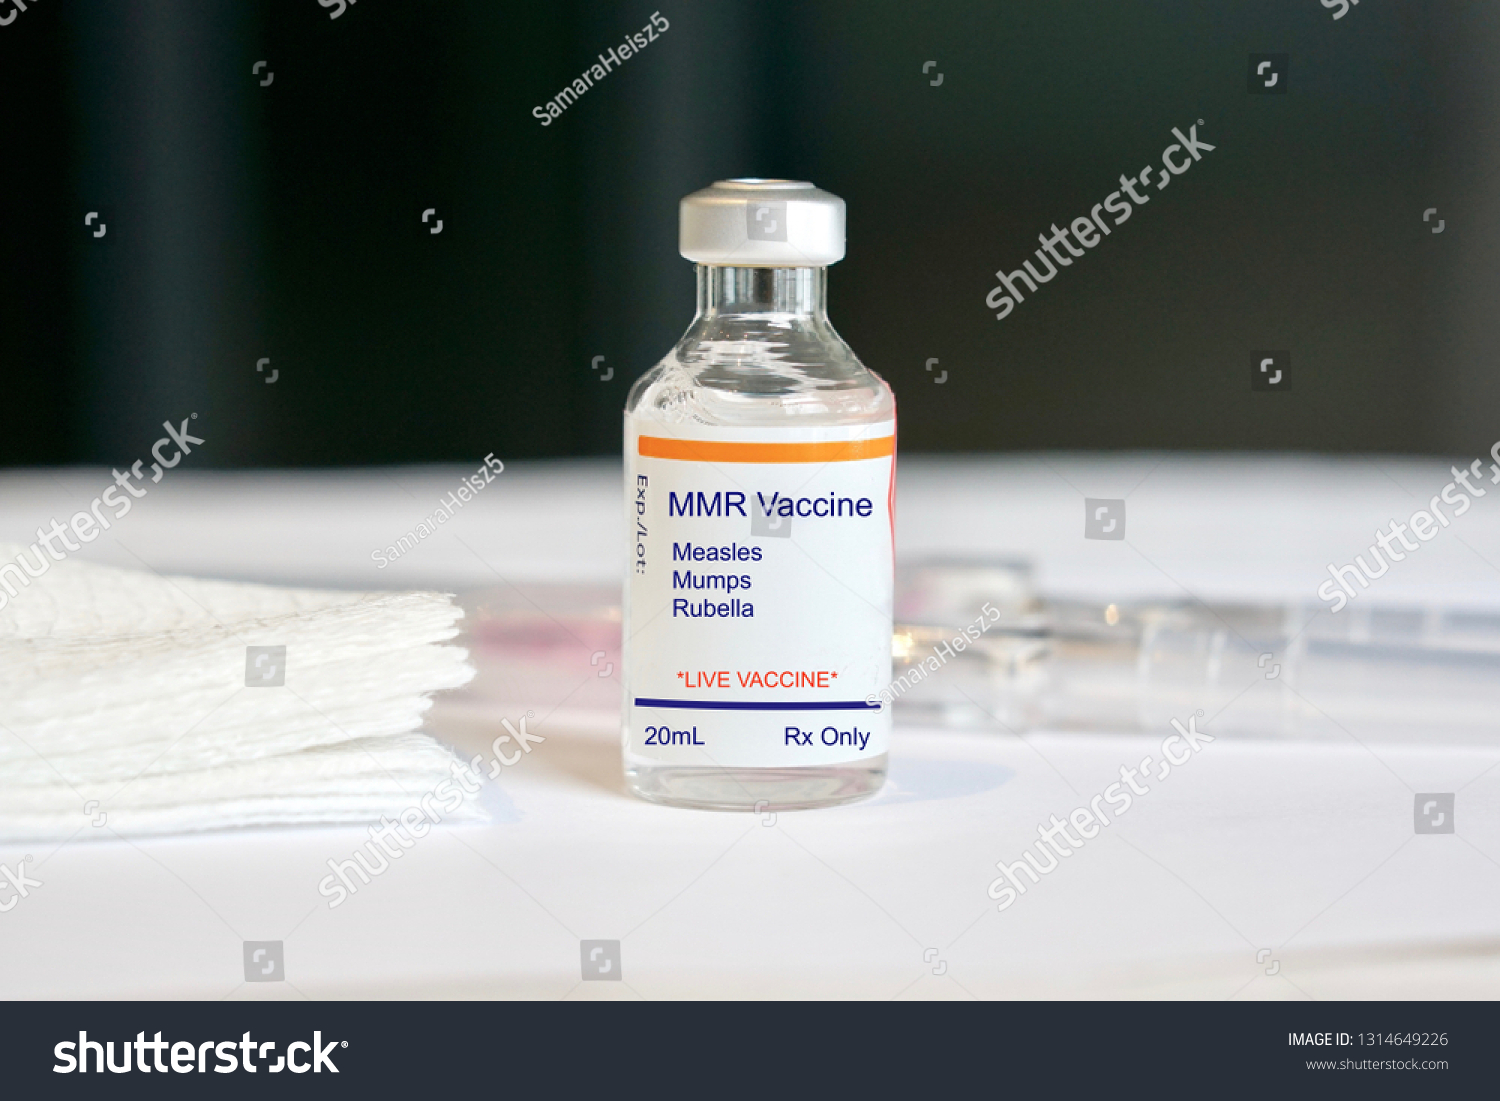 Concept of a MMR vaccine for Measles, Mumps, and Rubella as outbreaks occur resulting from anti-vaccination people #1314649226